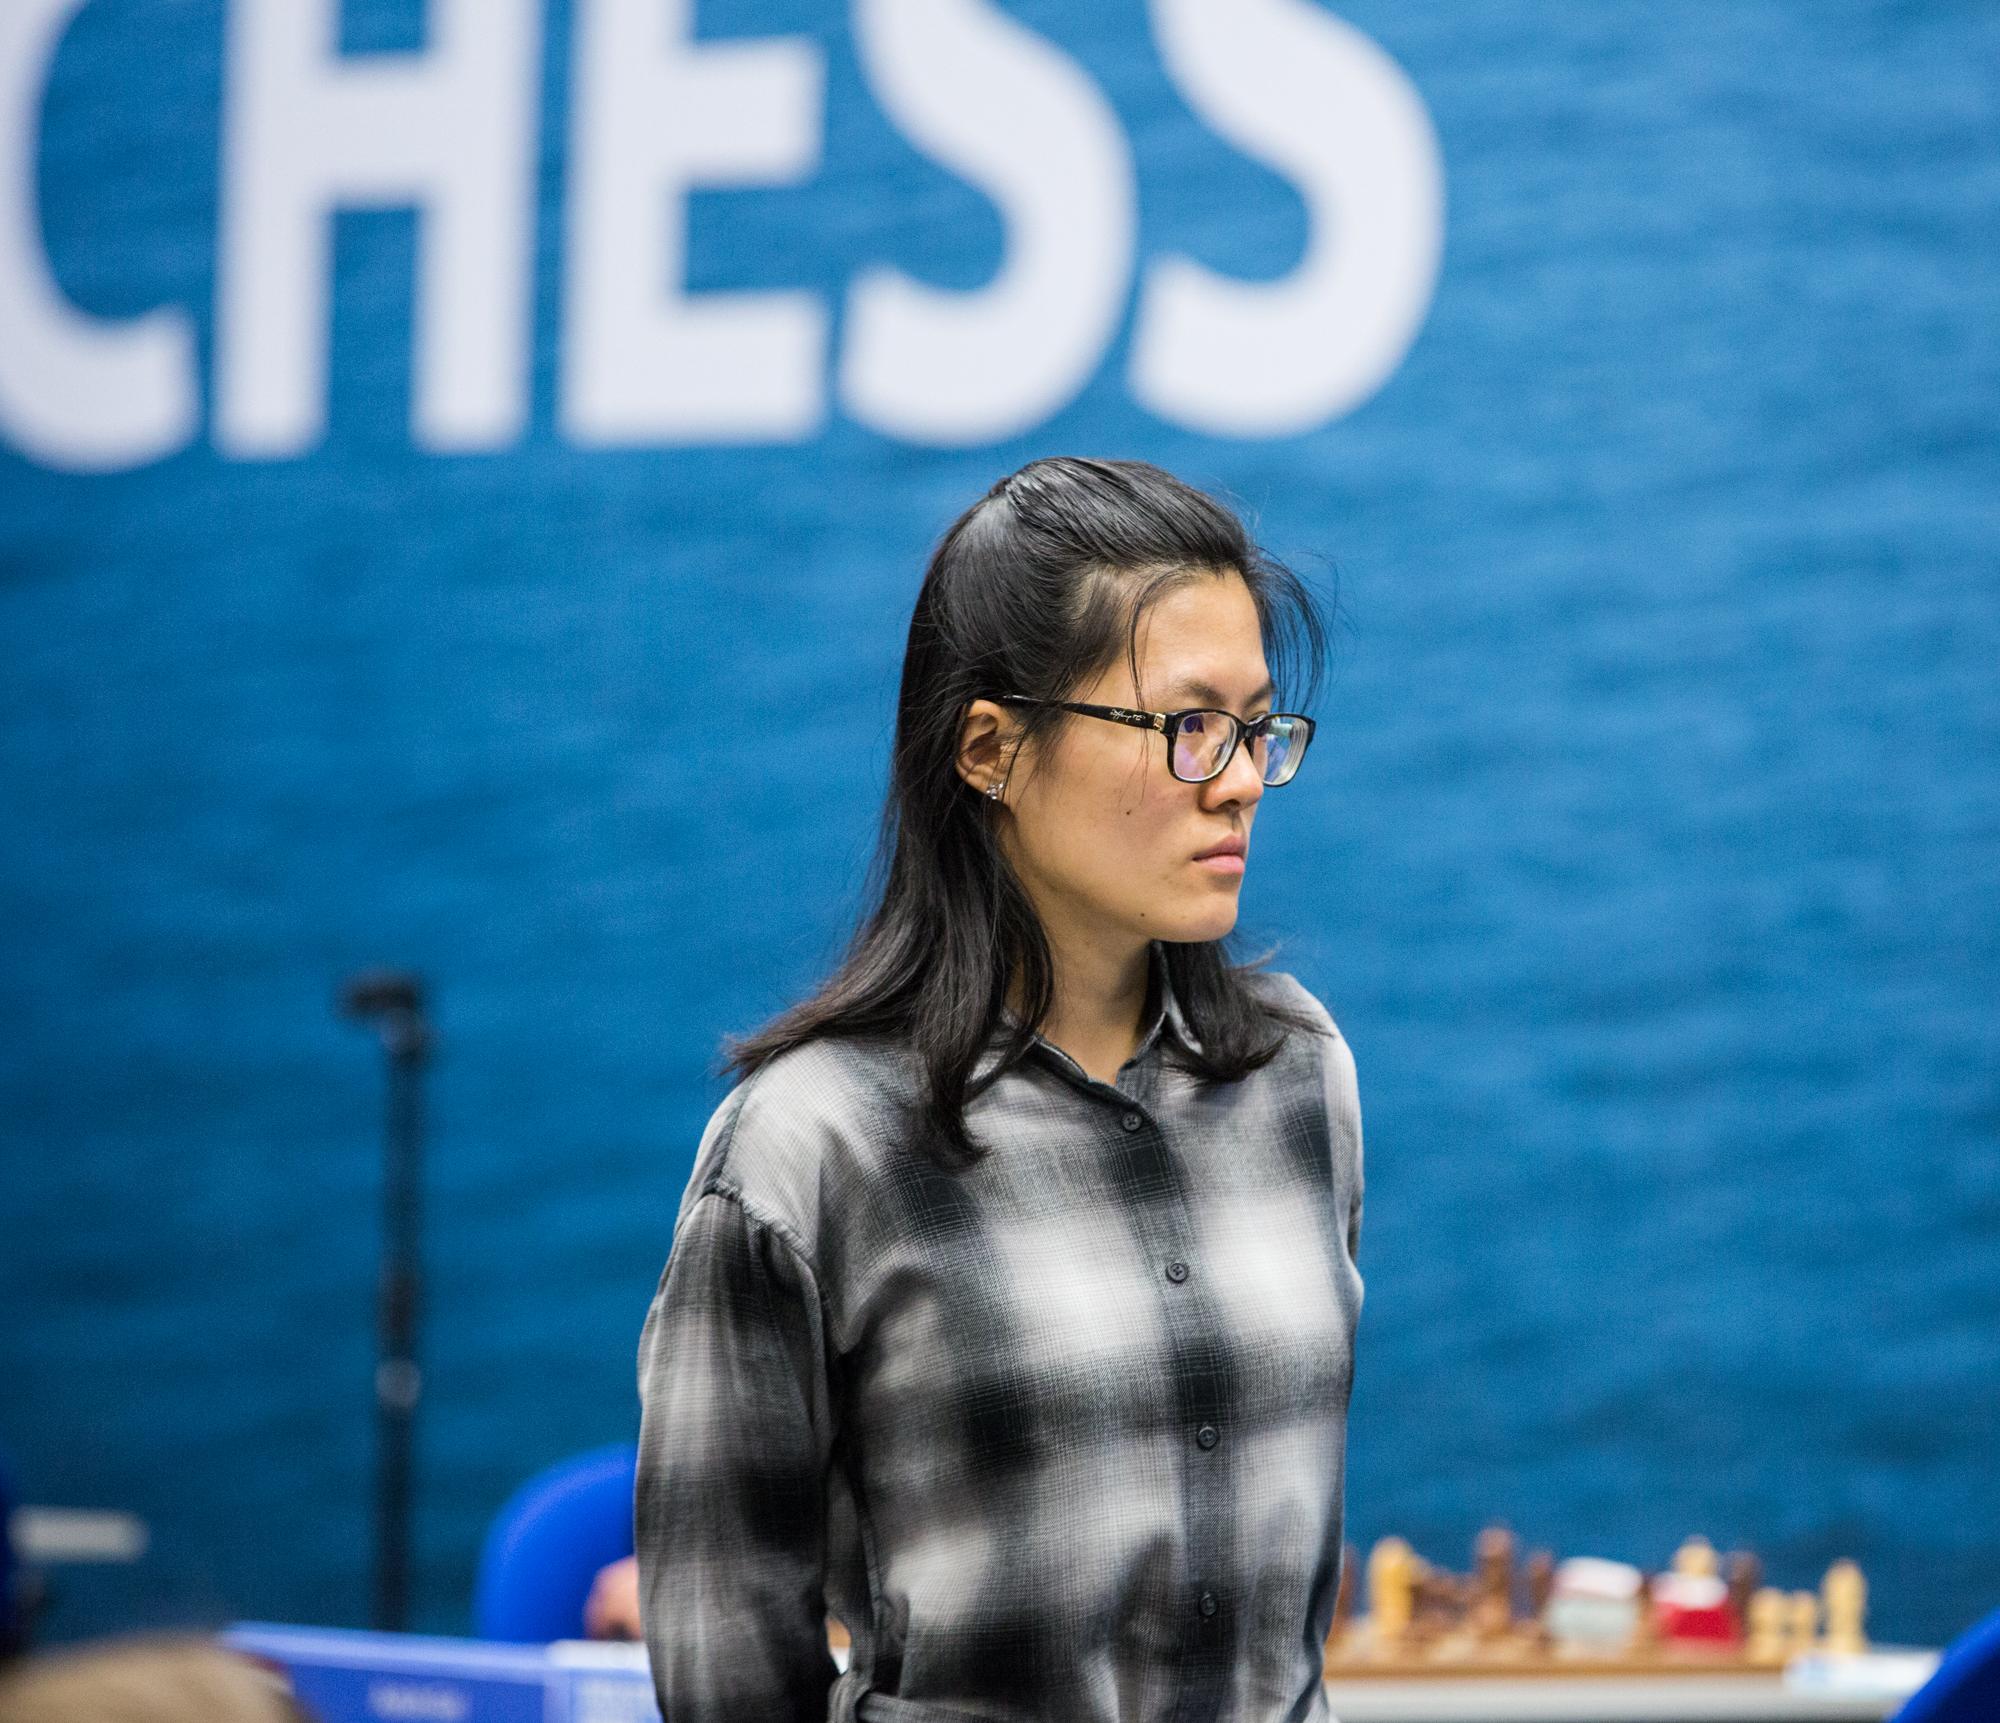 Champion chess player Hou Yifan's insights for business